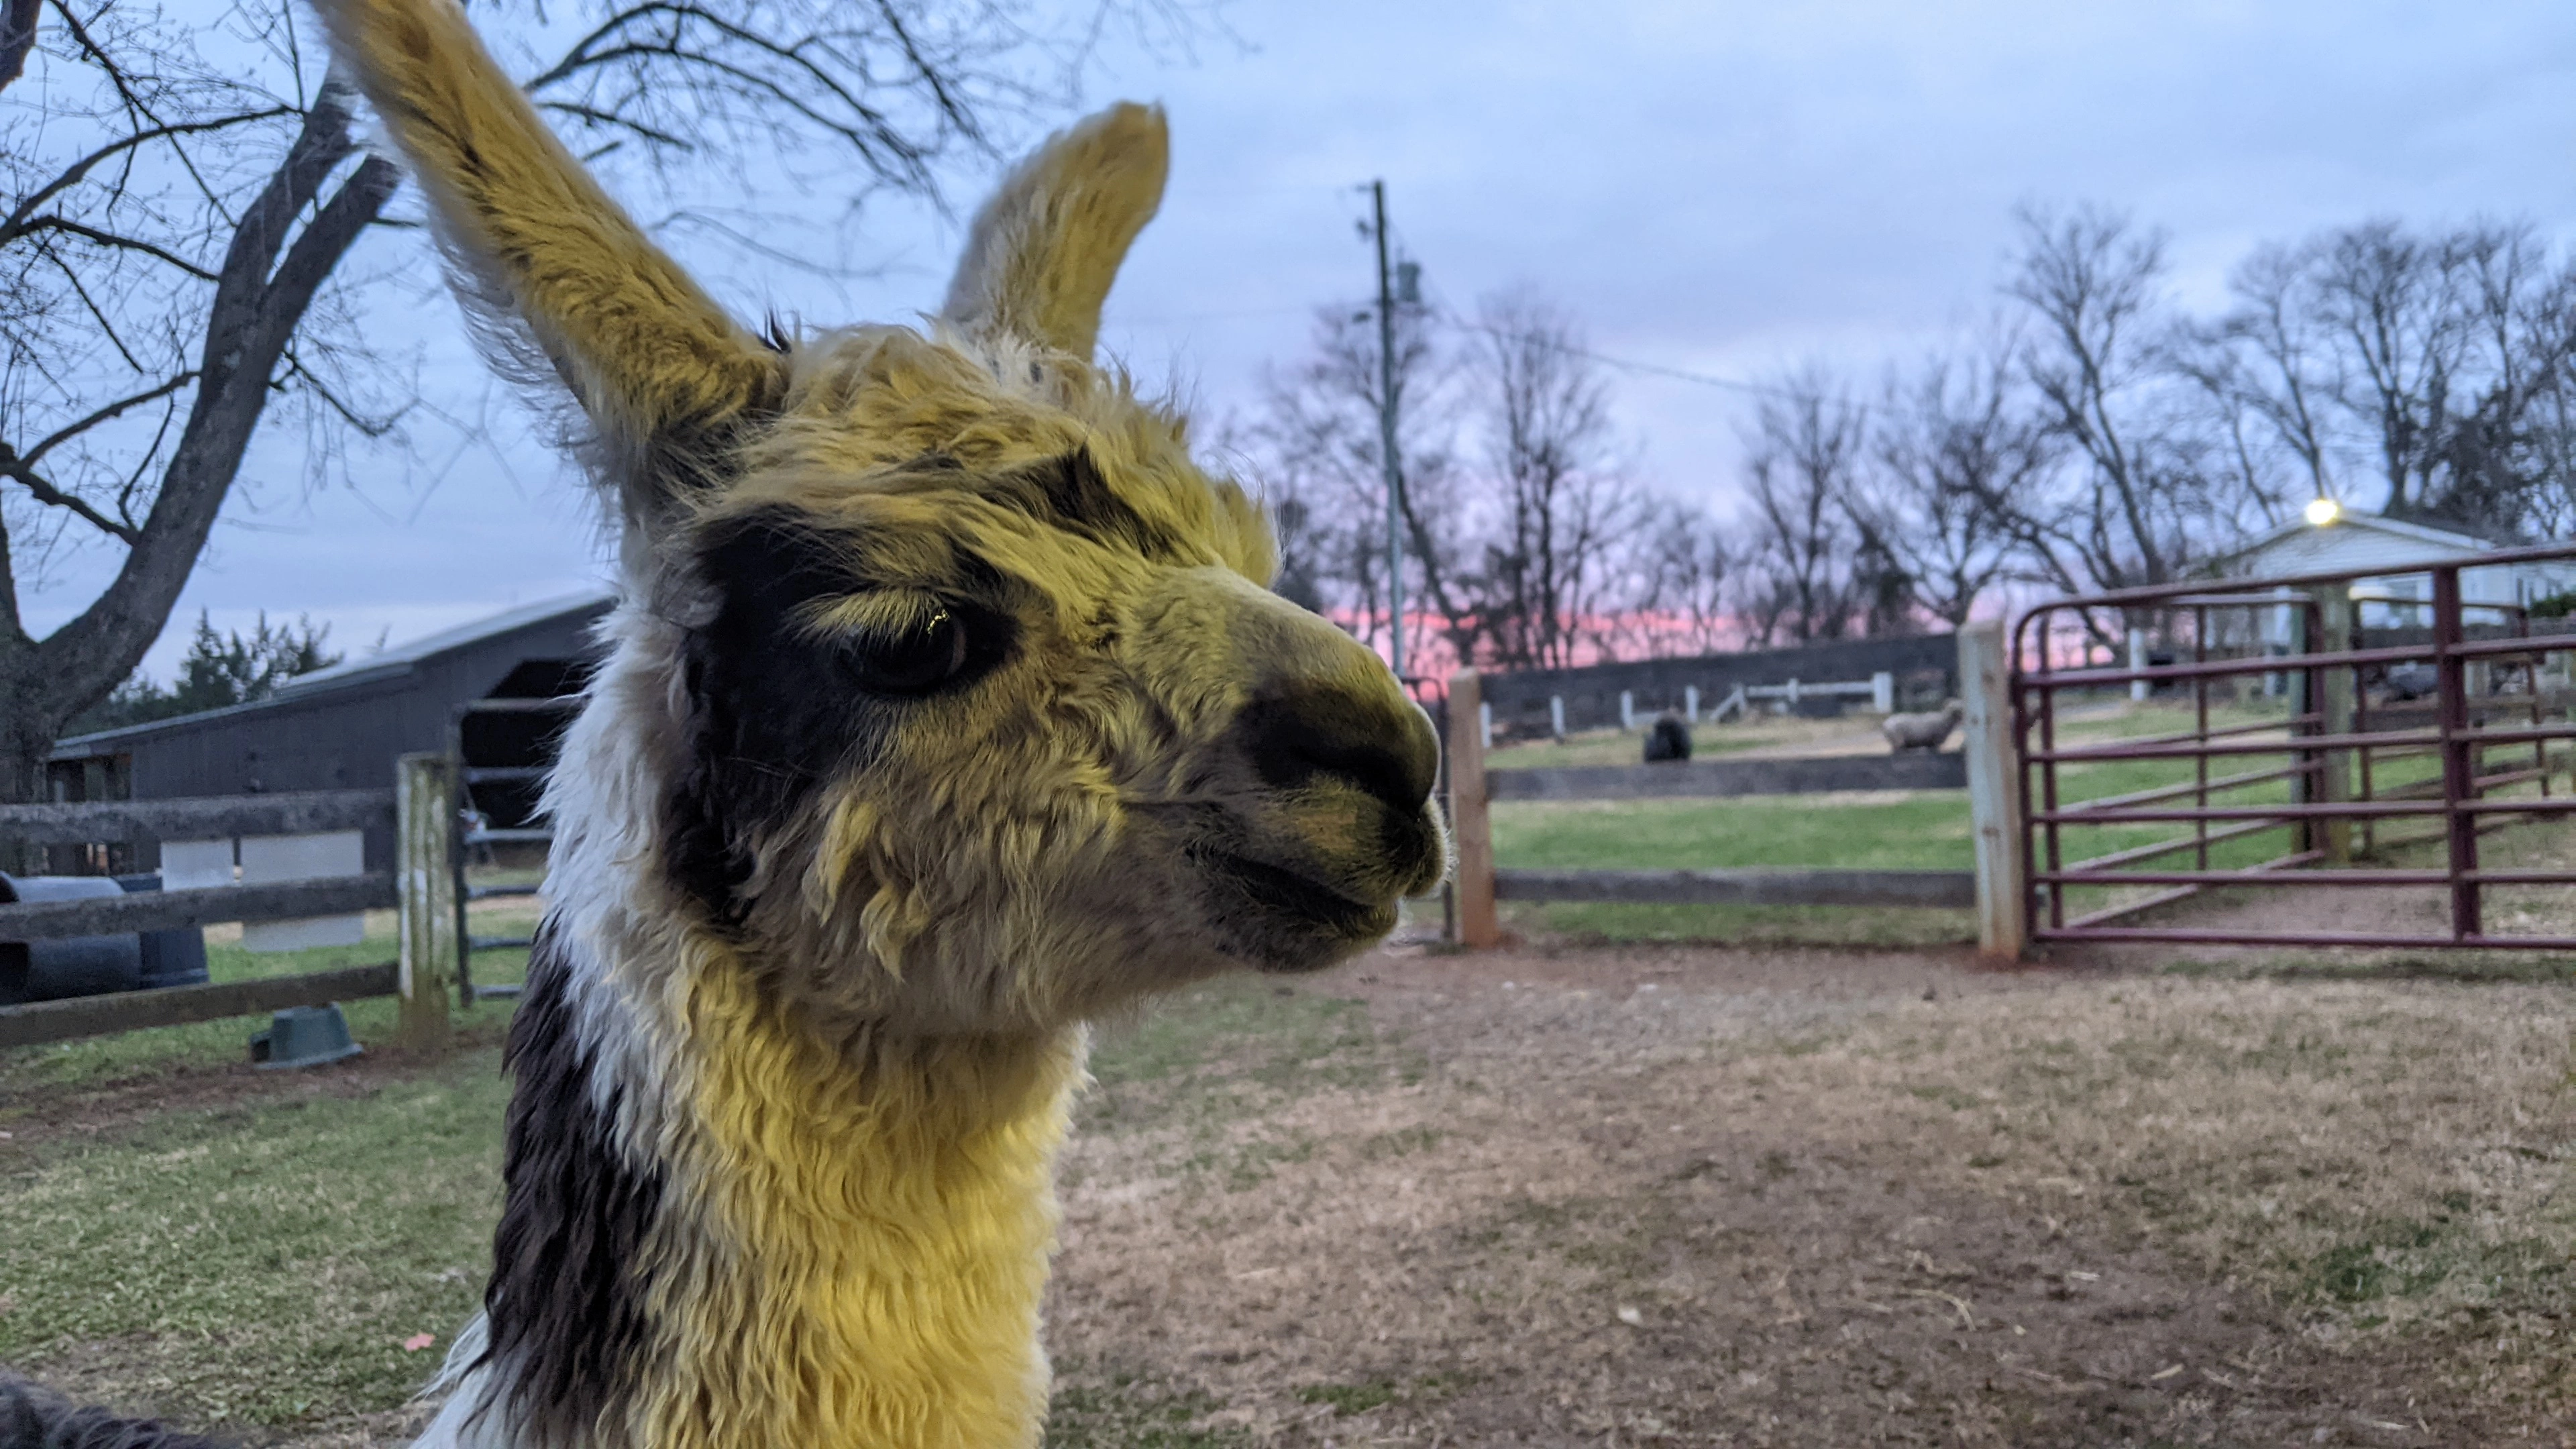 An image of a young llama named Flemming